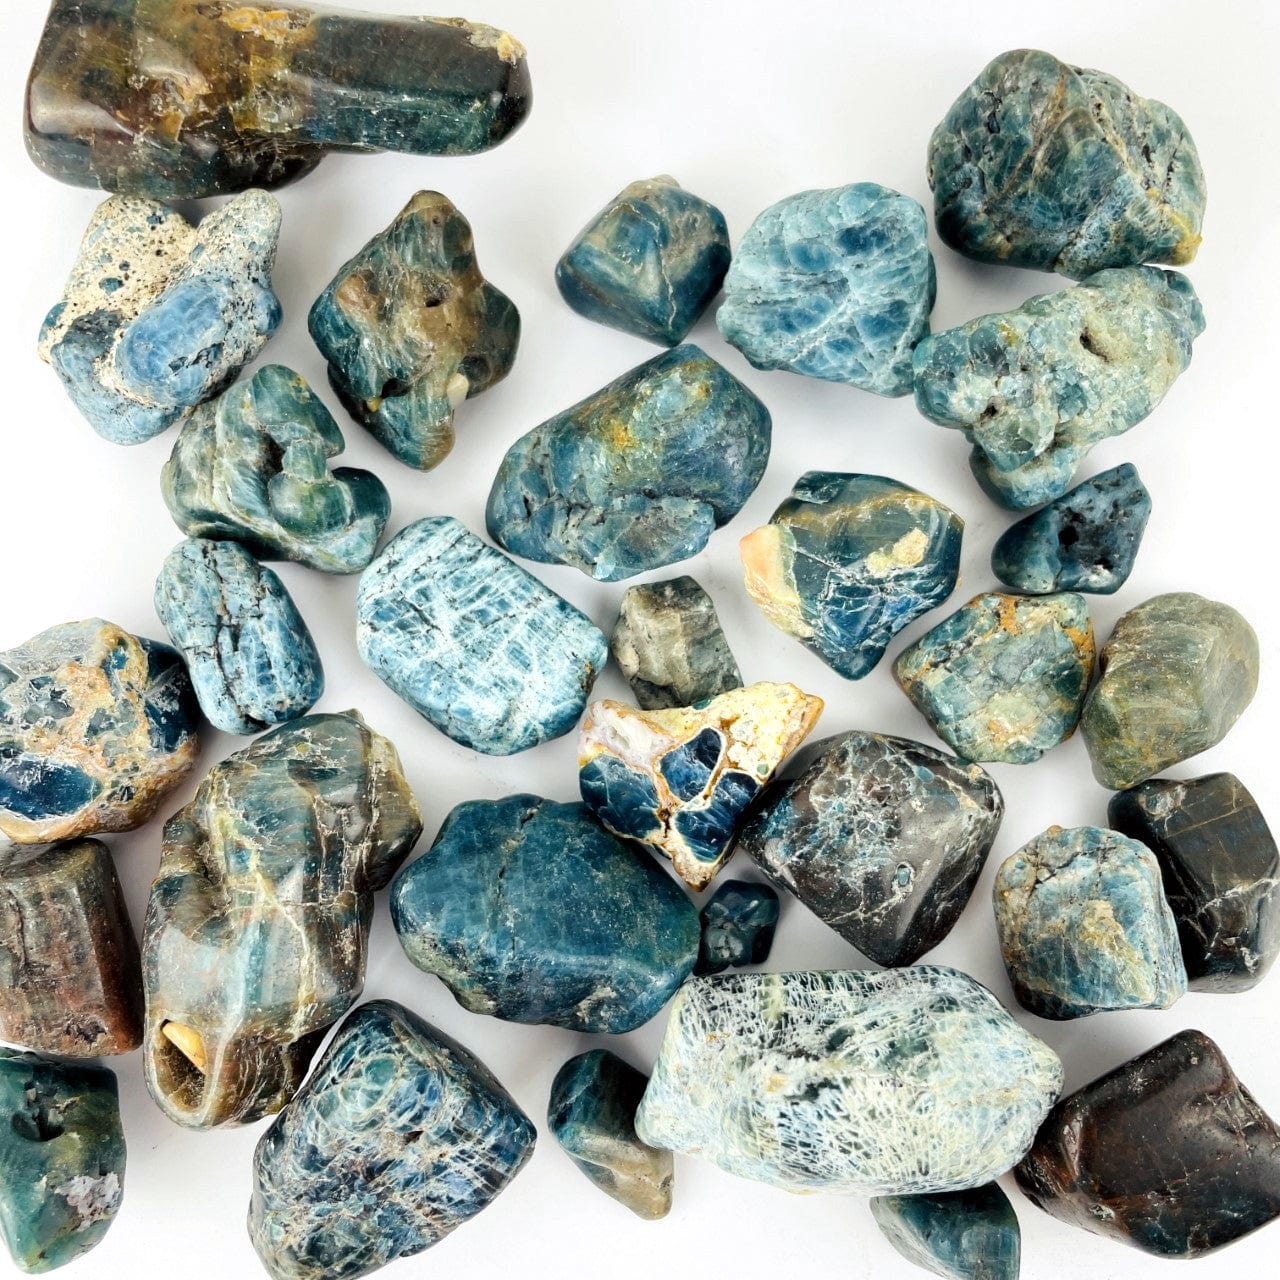 Natural Blue Apatite Roughly Polished Natural Stones